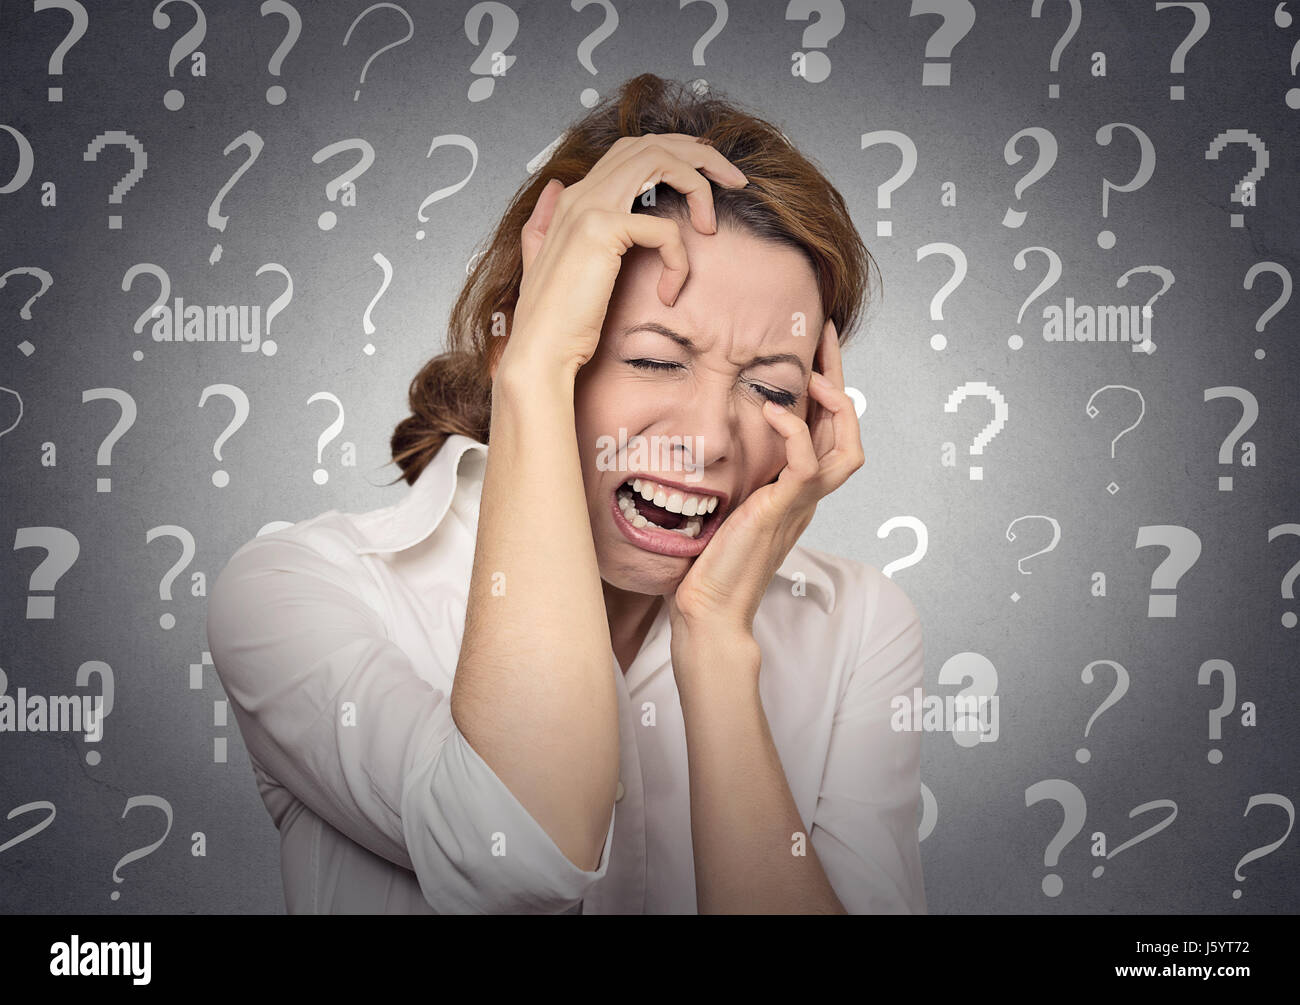 Portrait stressed crying woman has many questions isolated grey wall background with question marks. Human emotion face expression feeling body langua Stock Photo